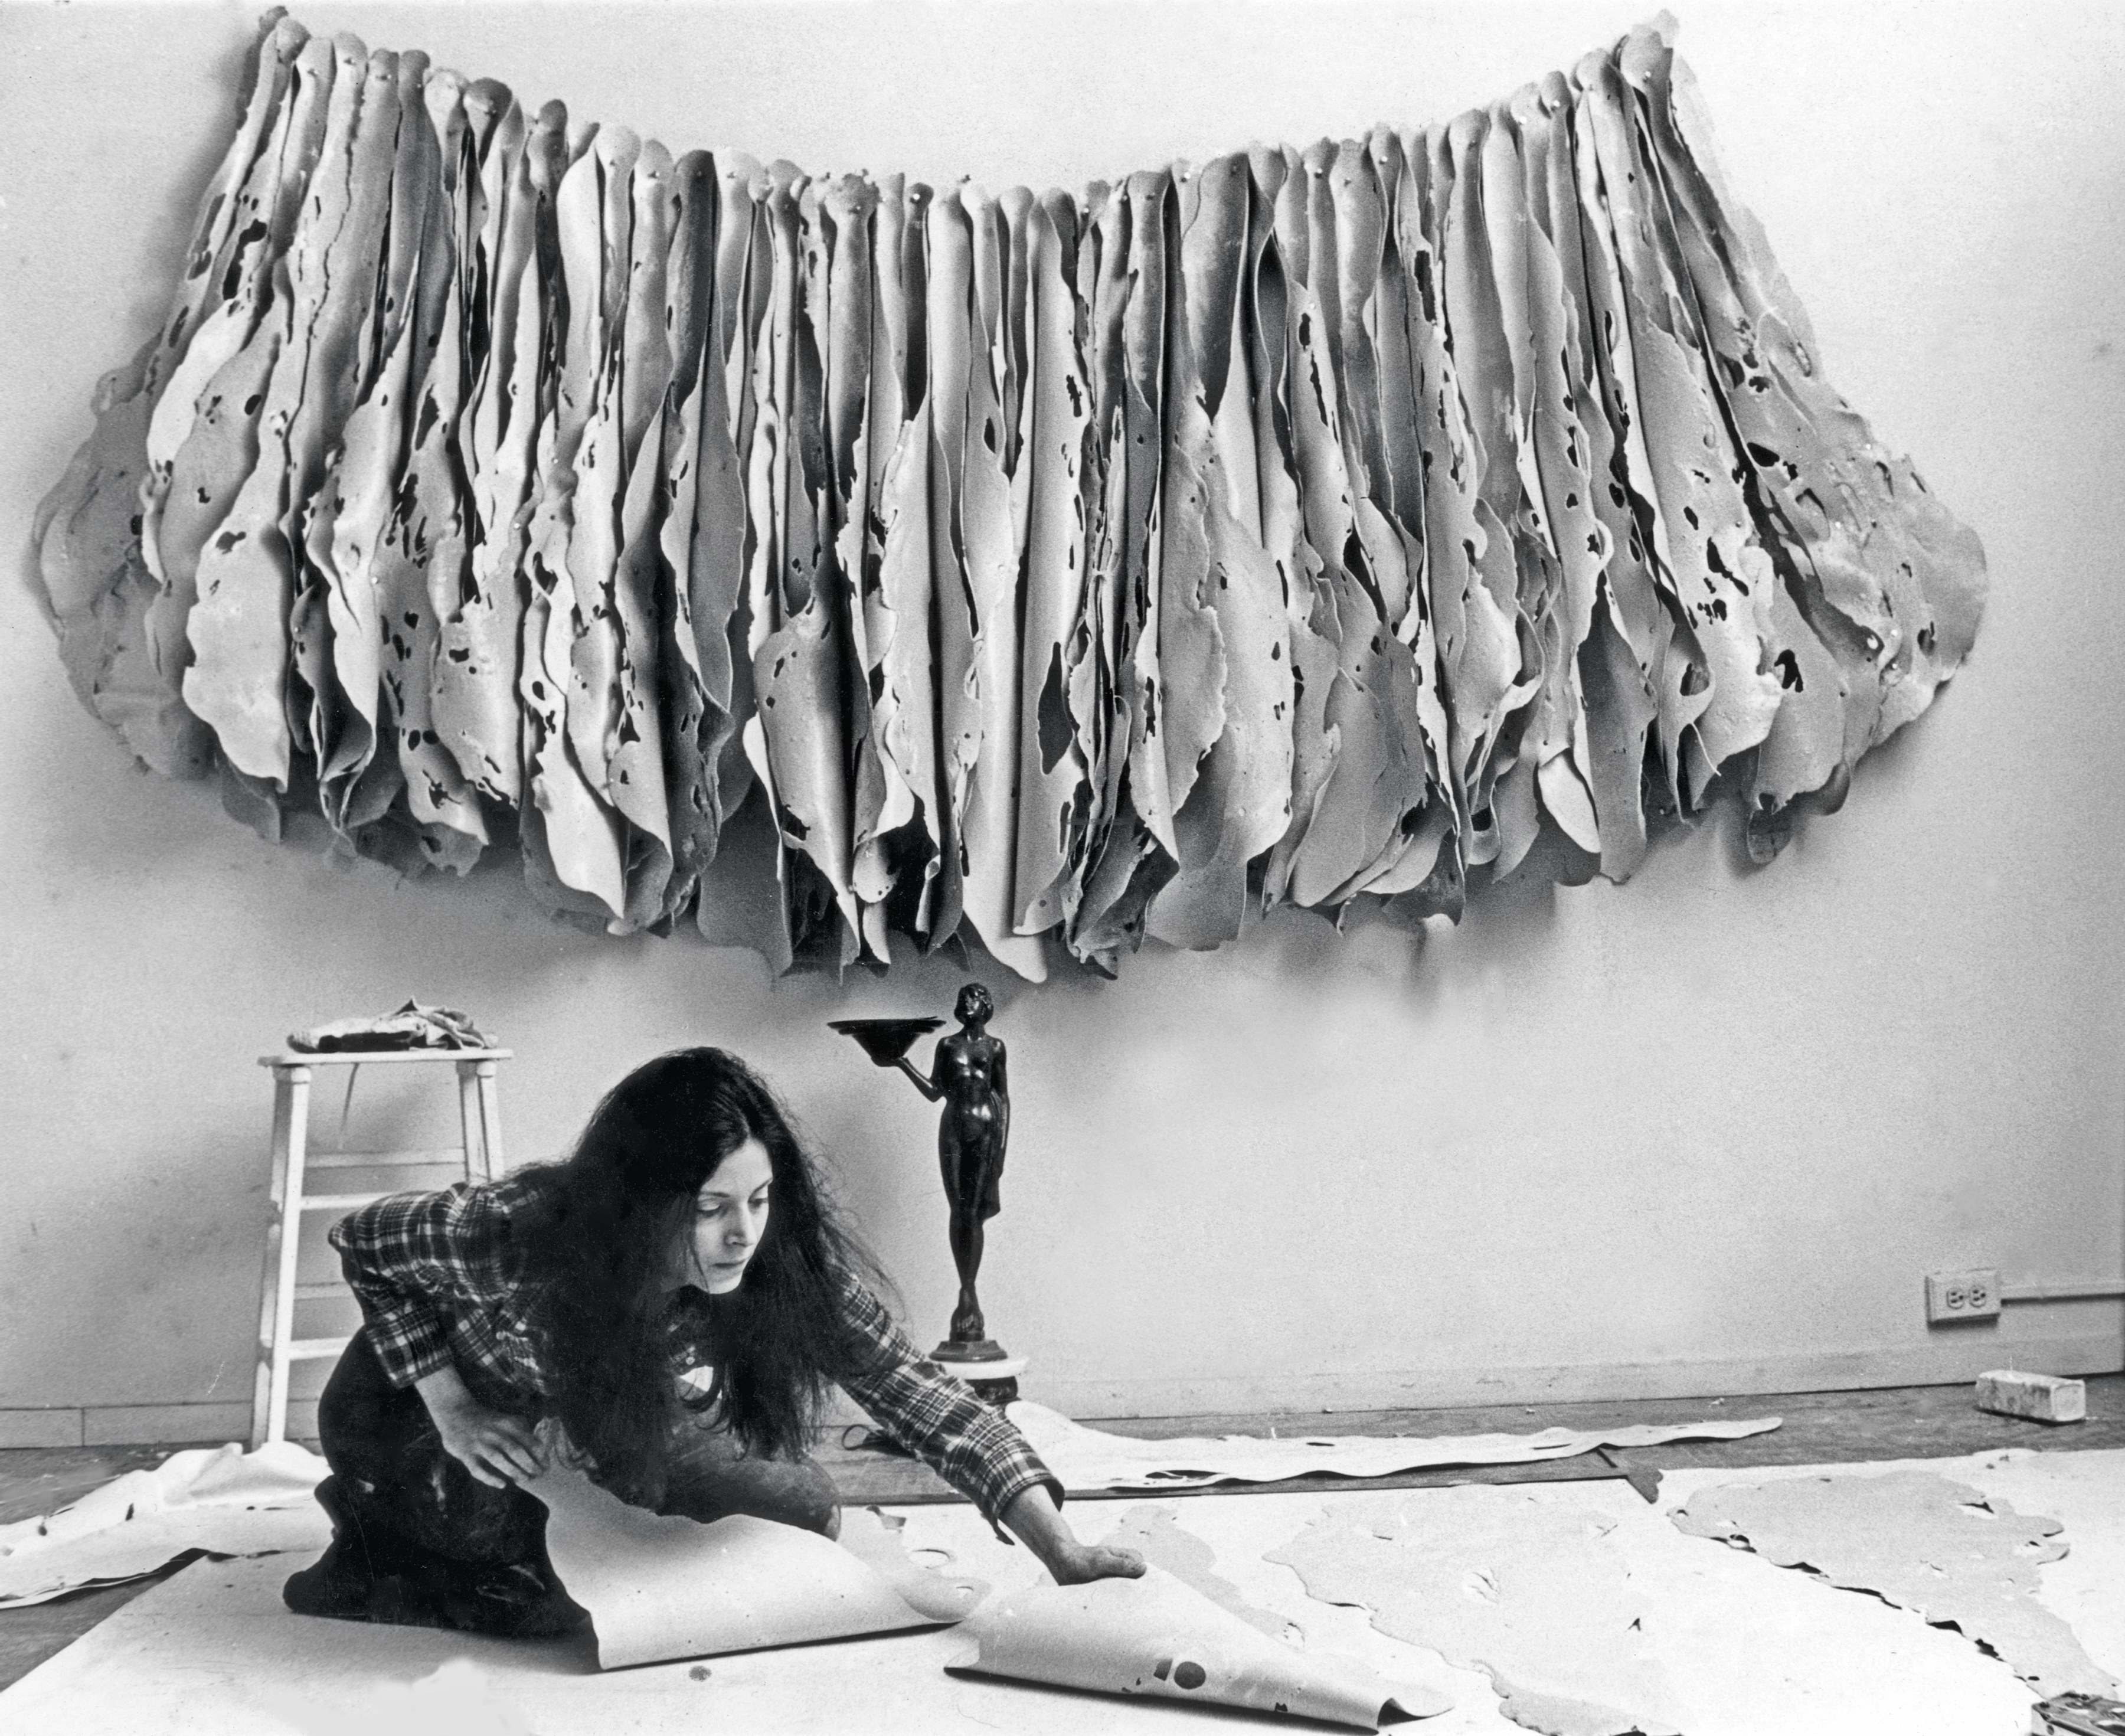 Hannah Wilke 
Hannah Wilke in her Broome Street studio with Centerfold on wall, 1973 (no longer extant)
Image: Hannah Wilke Collection &amp;amp; Archive, Los Angeles